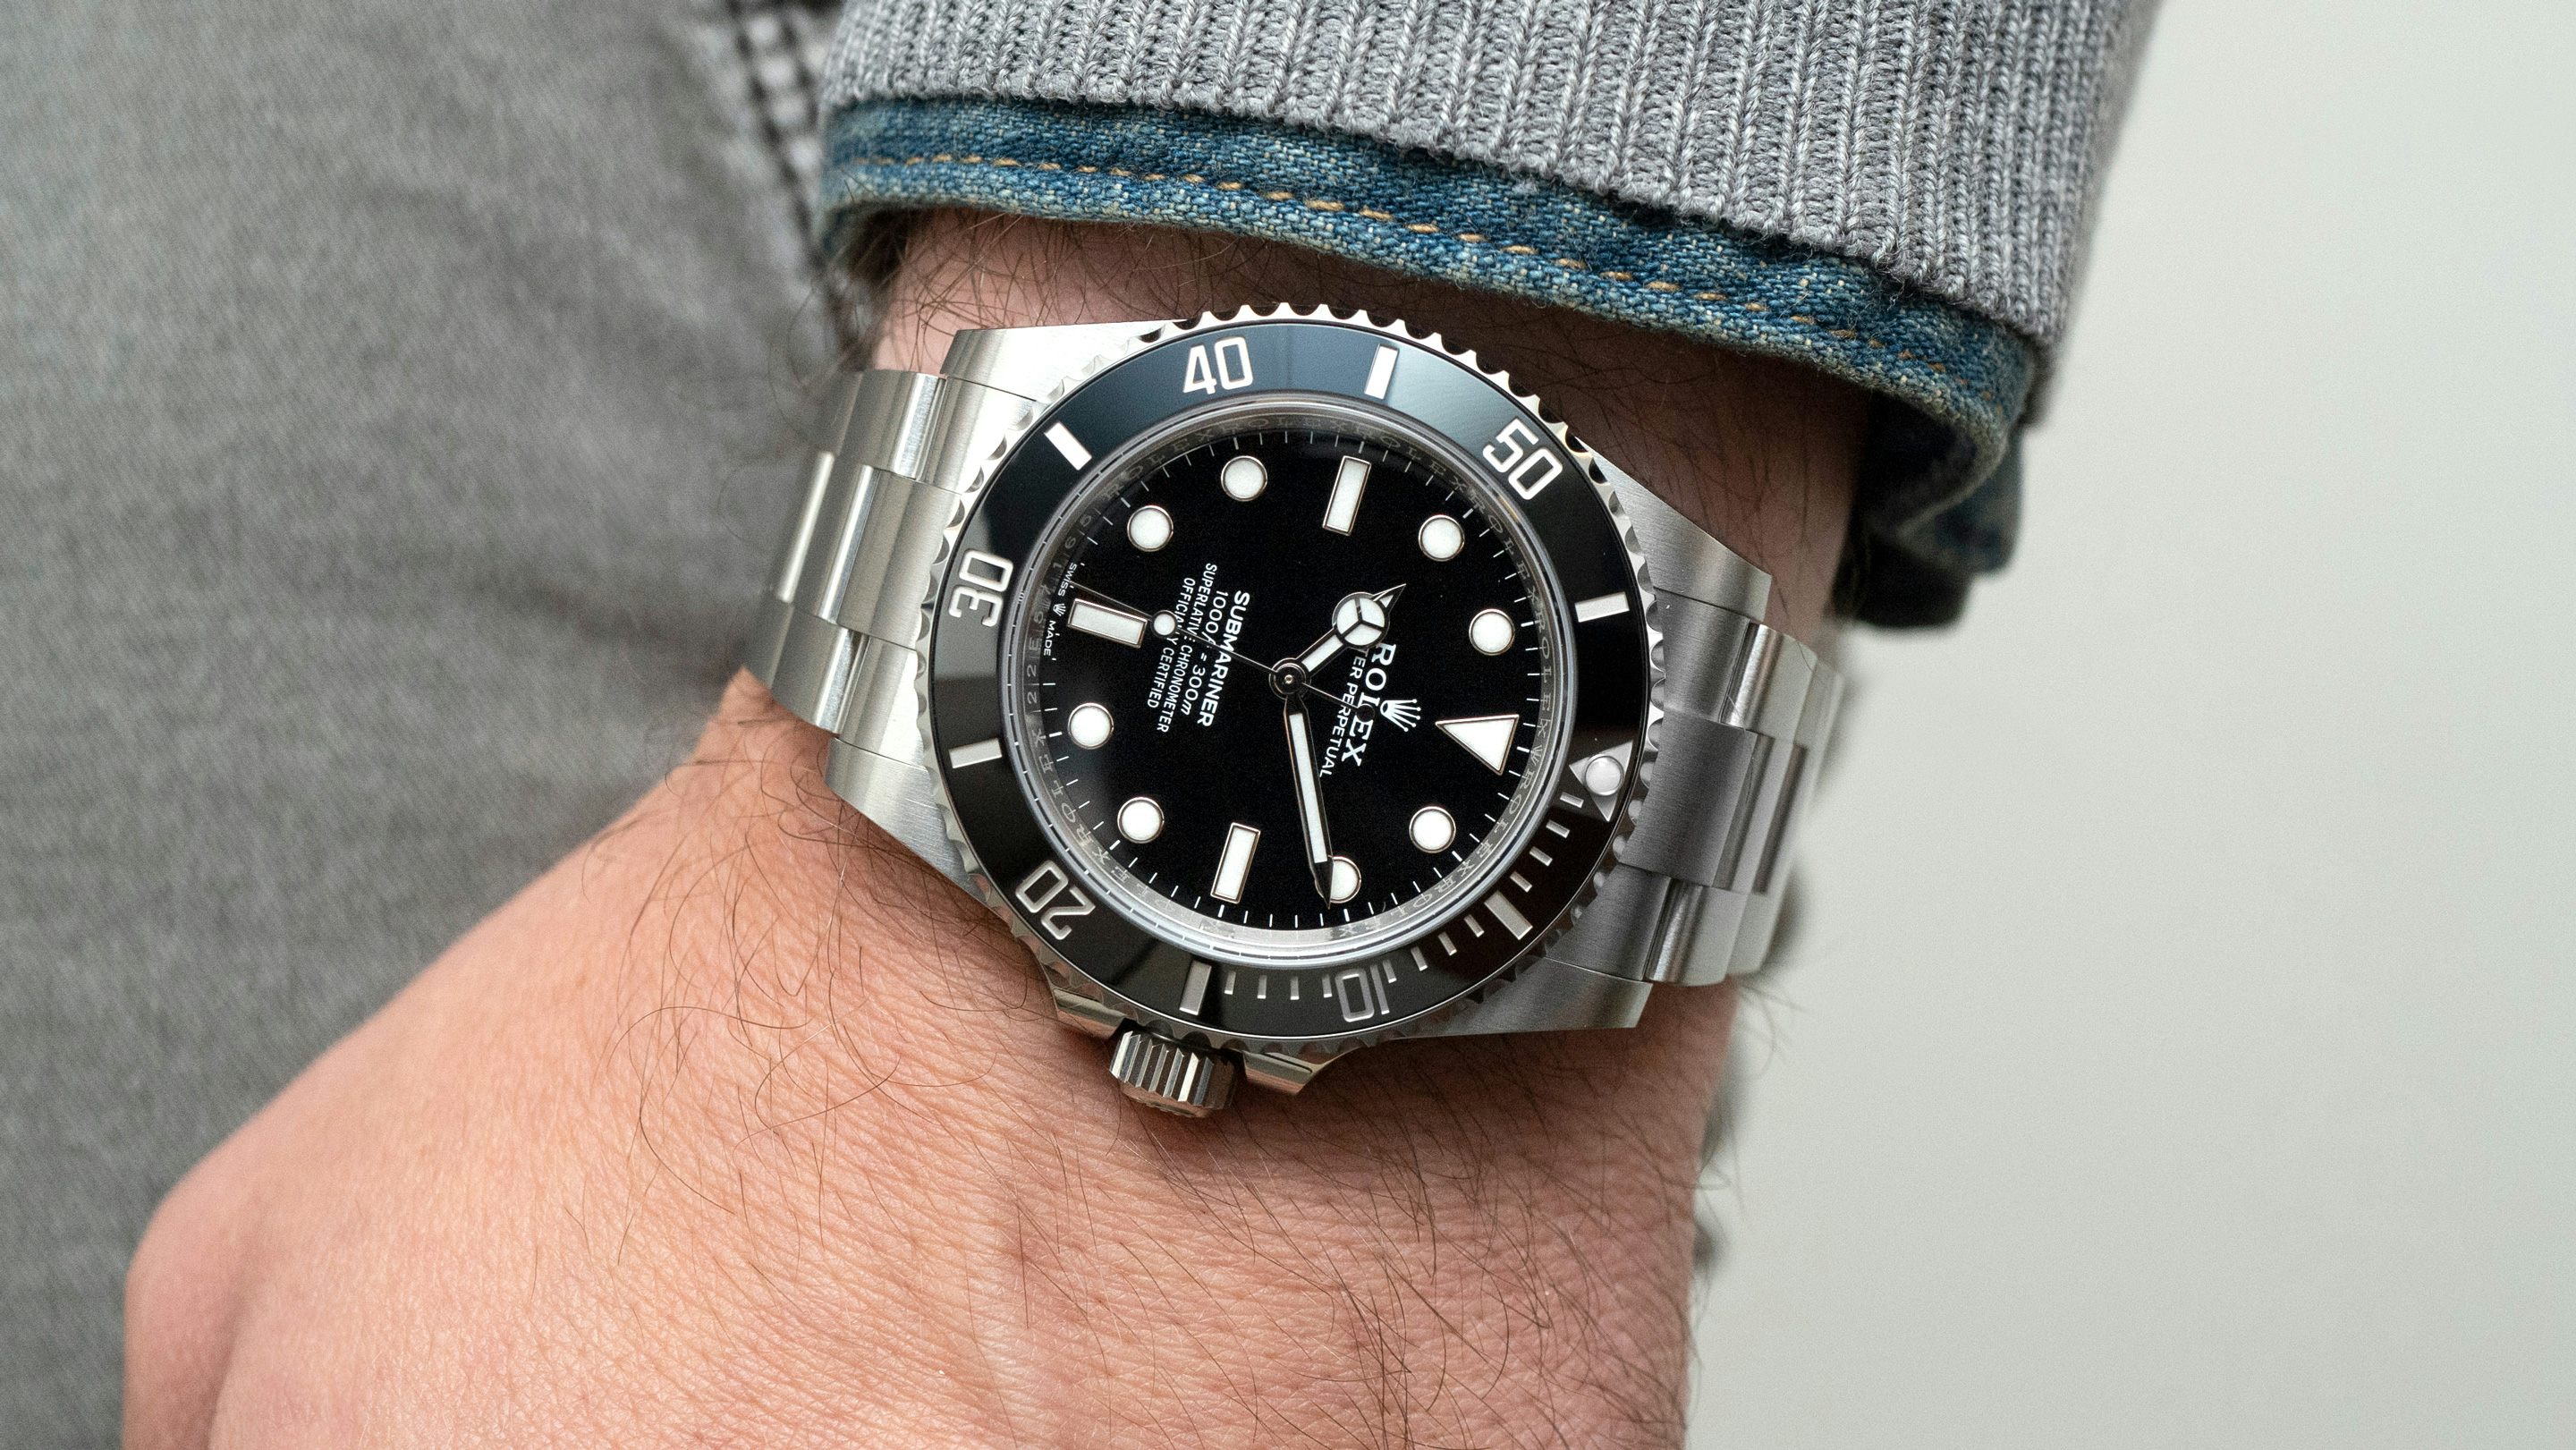 Kabelbane Shetland linje In-Depth: Five Things I Learned From The 2020 Rolex Releases - Hodinkee